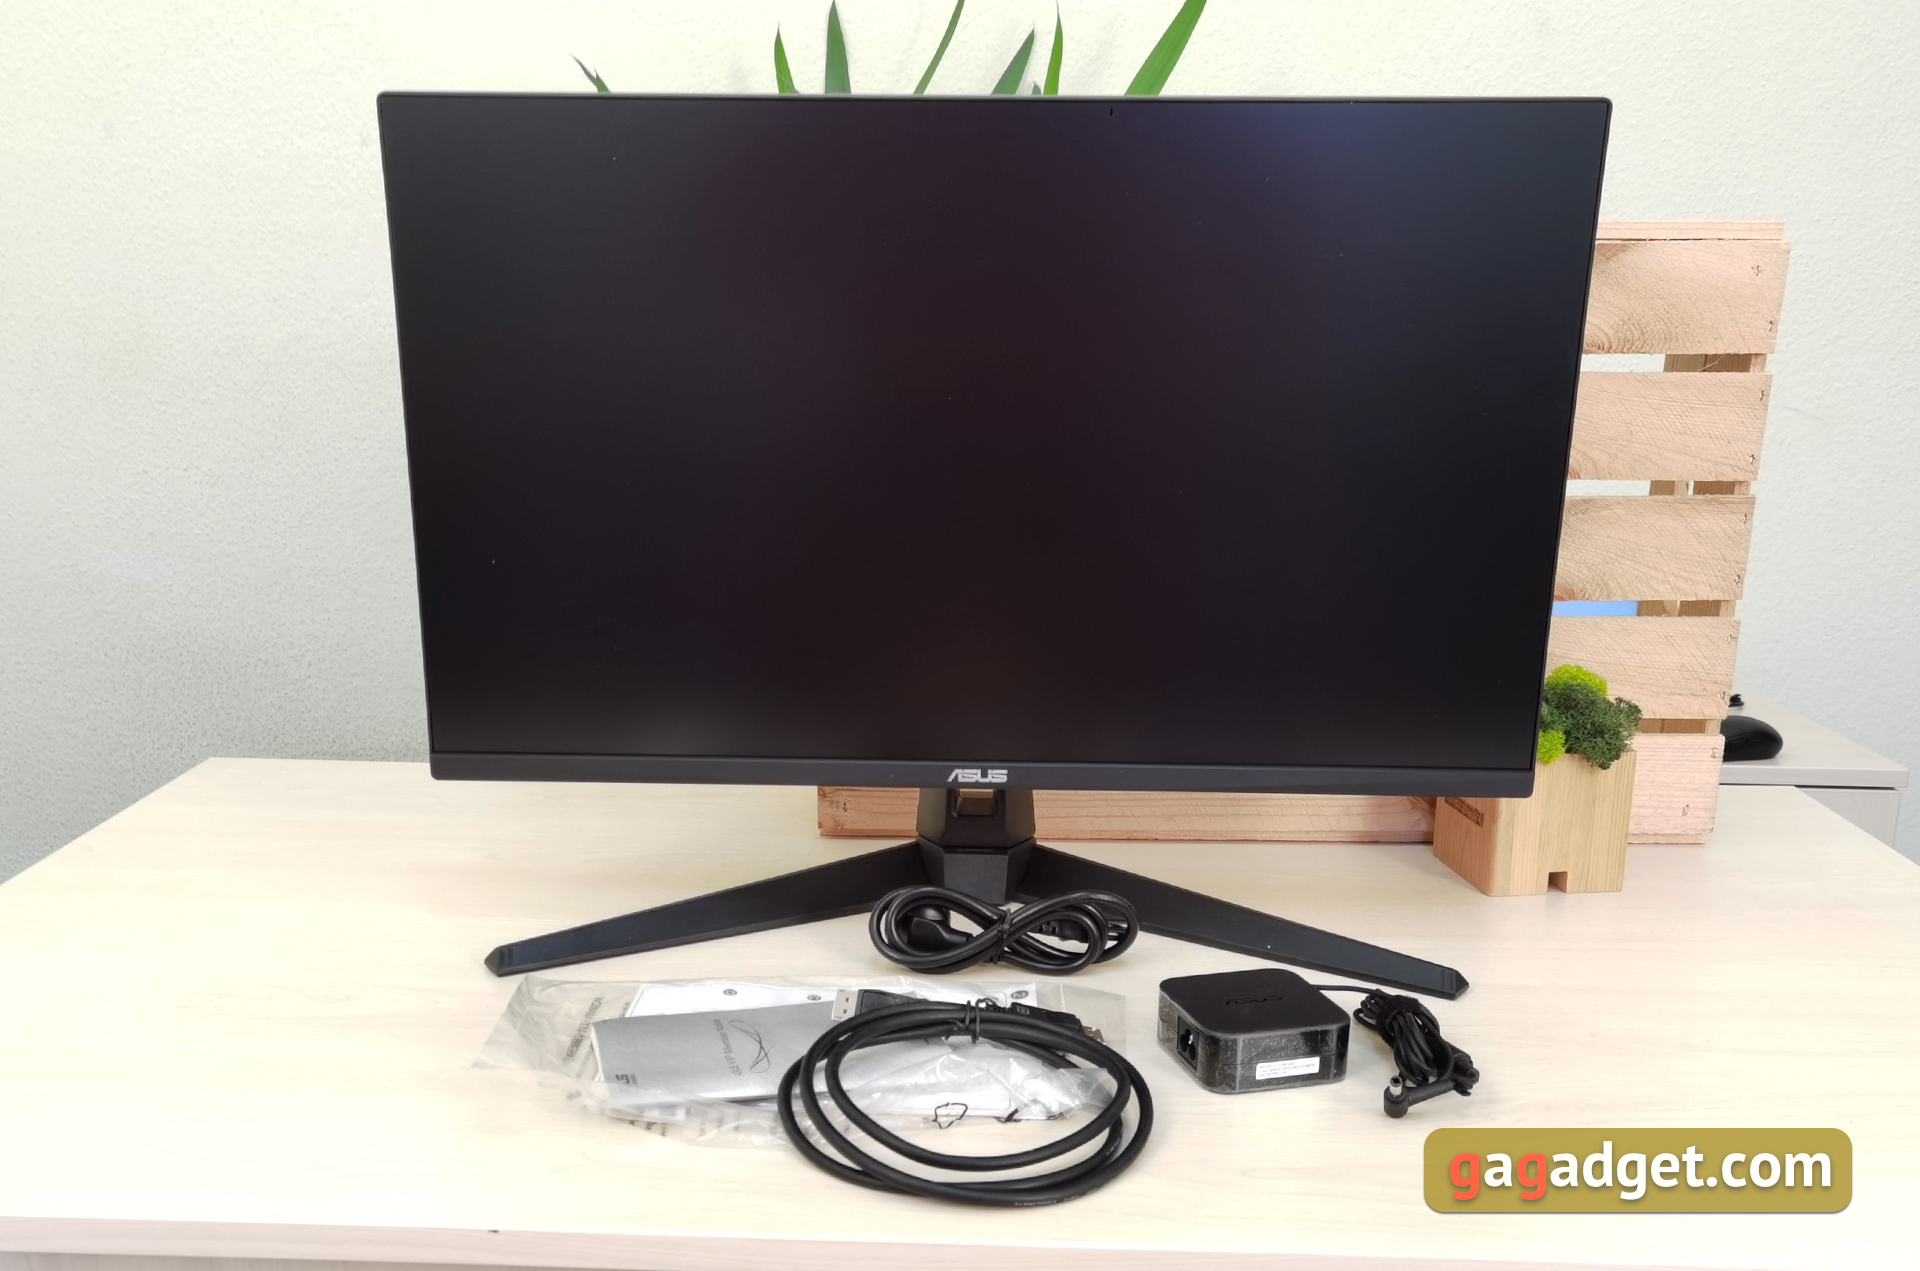 ASUS TUF Gaming VG279Q1A review: 27-inch gaming monitor with IPS panel and 165 Hz refresh rate-4